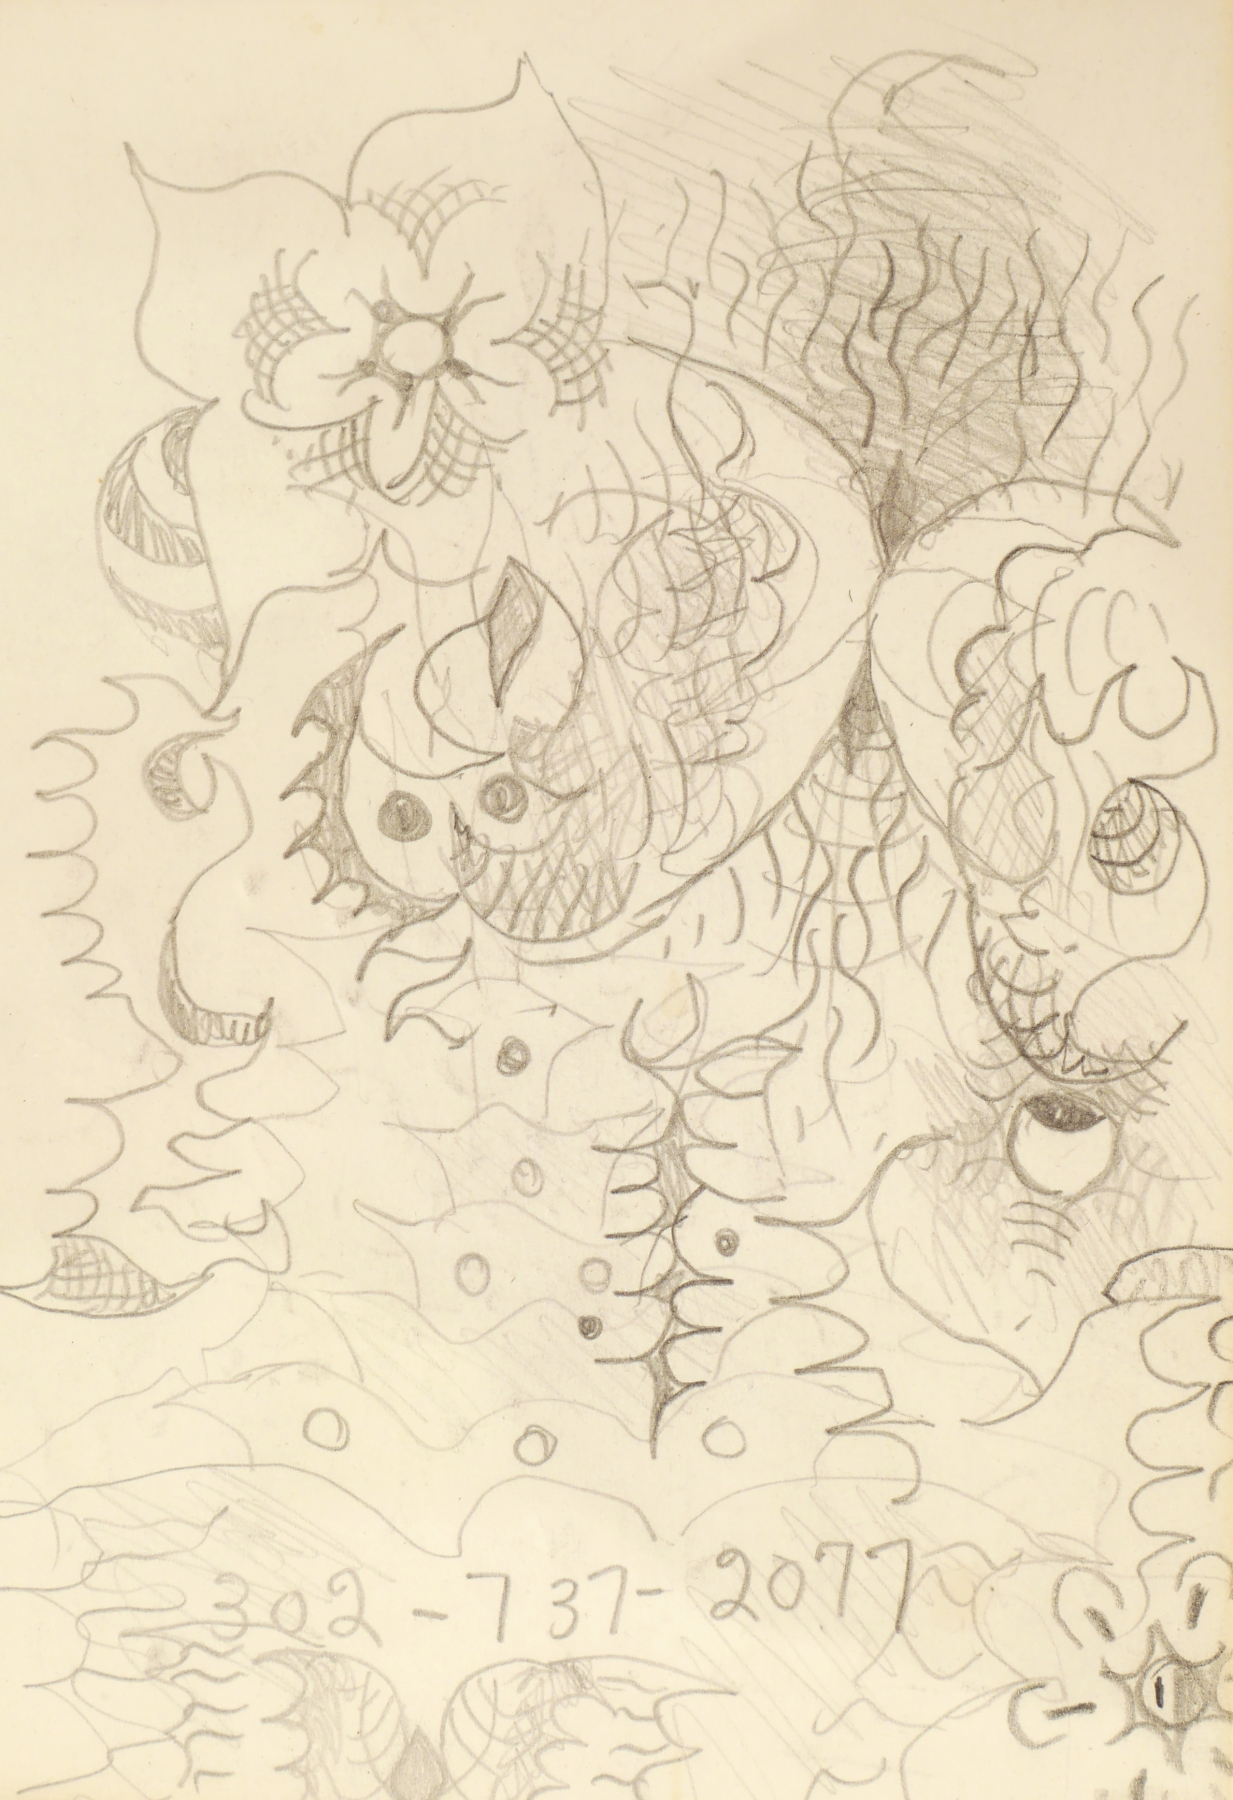 Doodle 2, n.d.

Pencil on paper

5 1/8 x 7 1/4 inches&amp;nbsp;